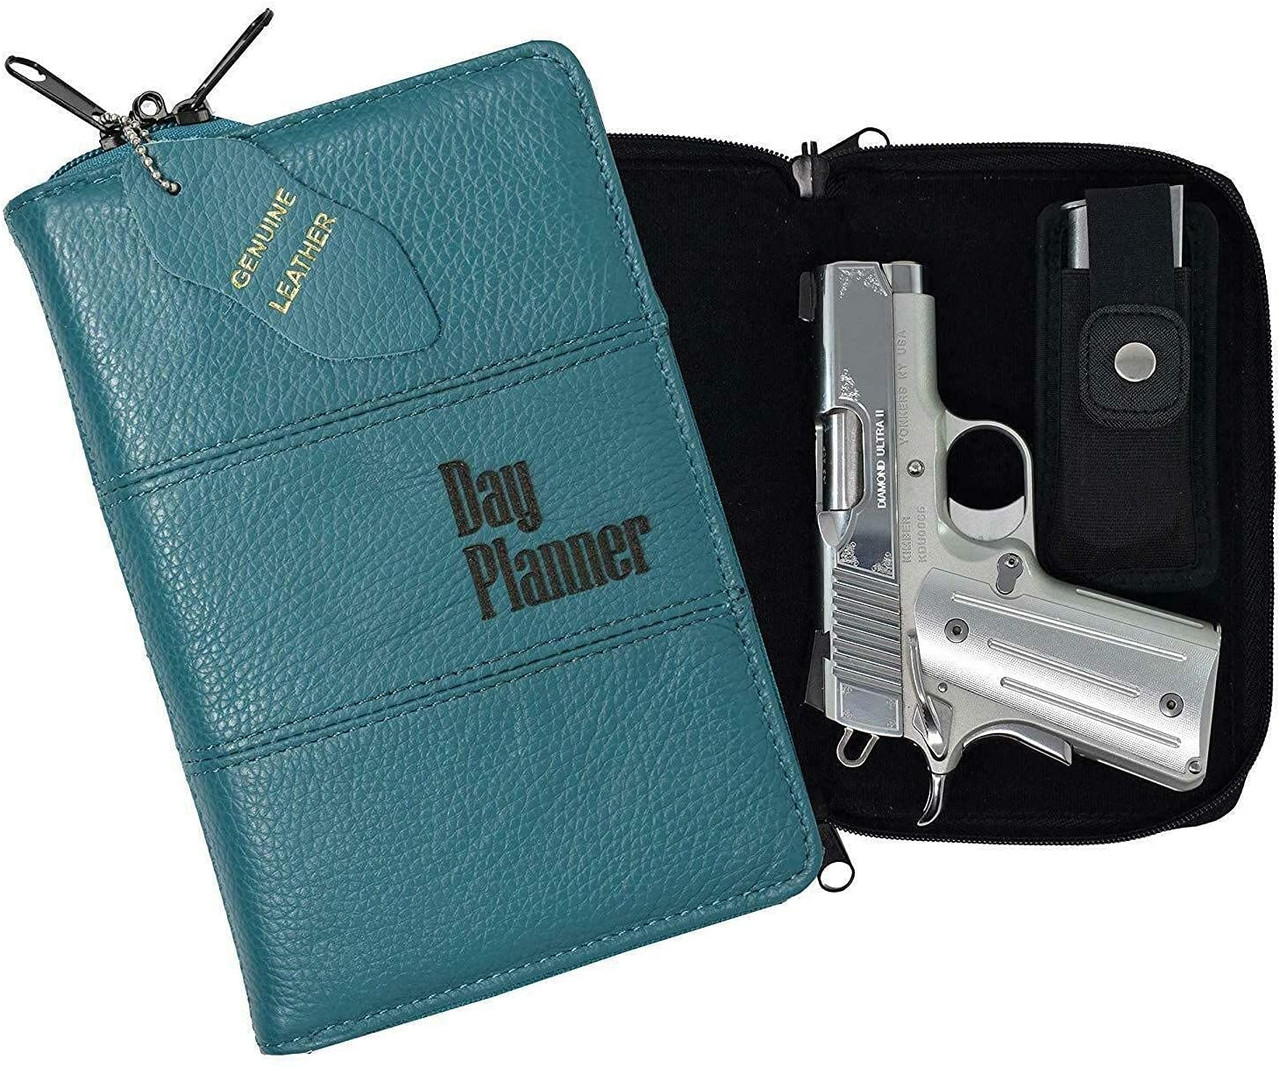 Garrison Grip Quality Leather Locking Day Planner Gun Case for Subcompact Guns. 3 Digit Lock Included. (GTSN-DP) TURQ